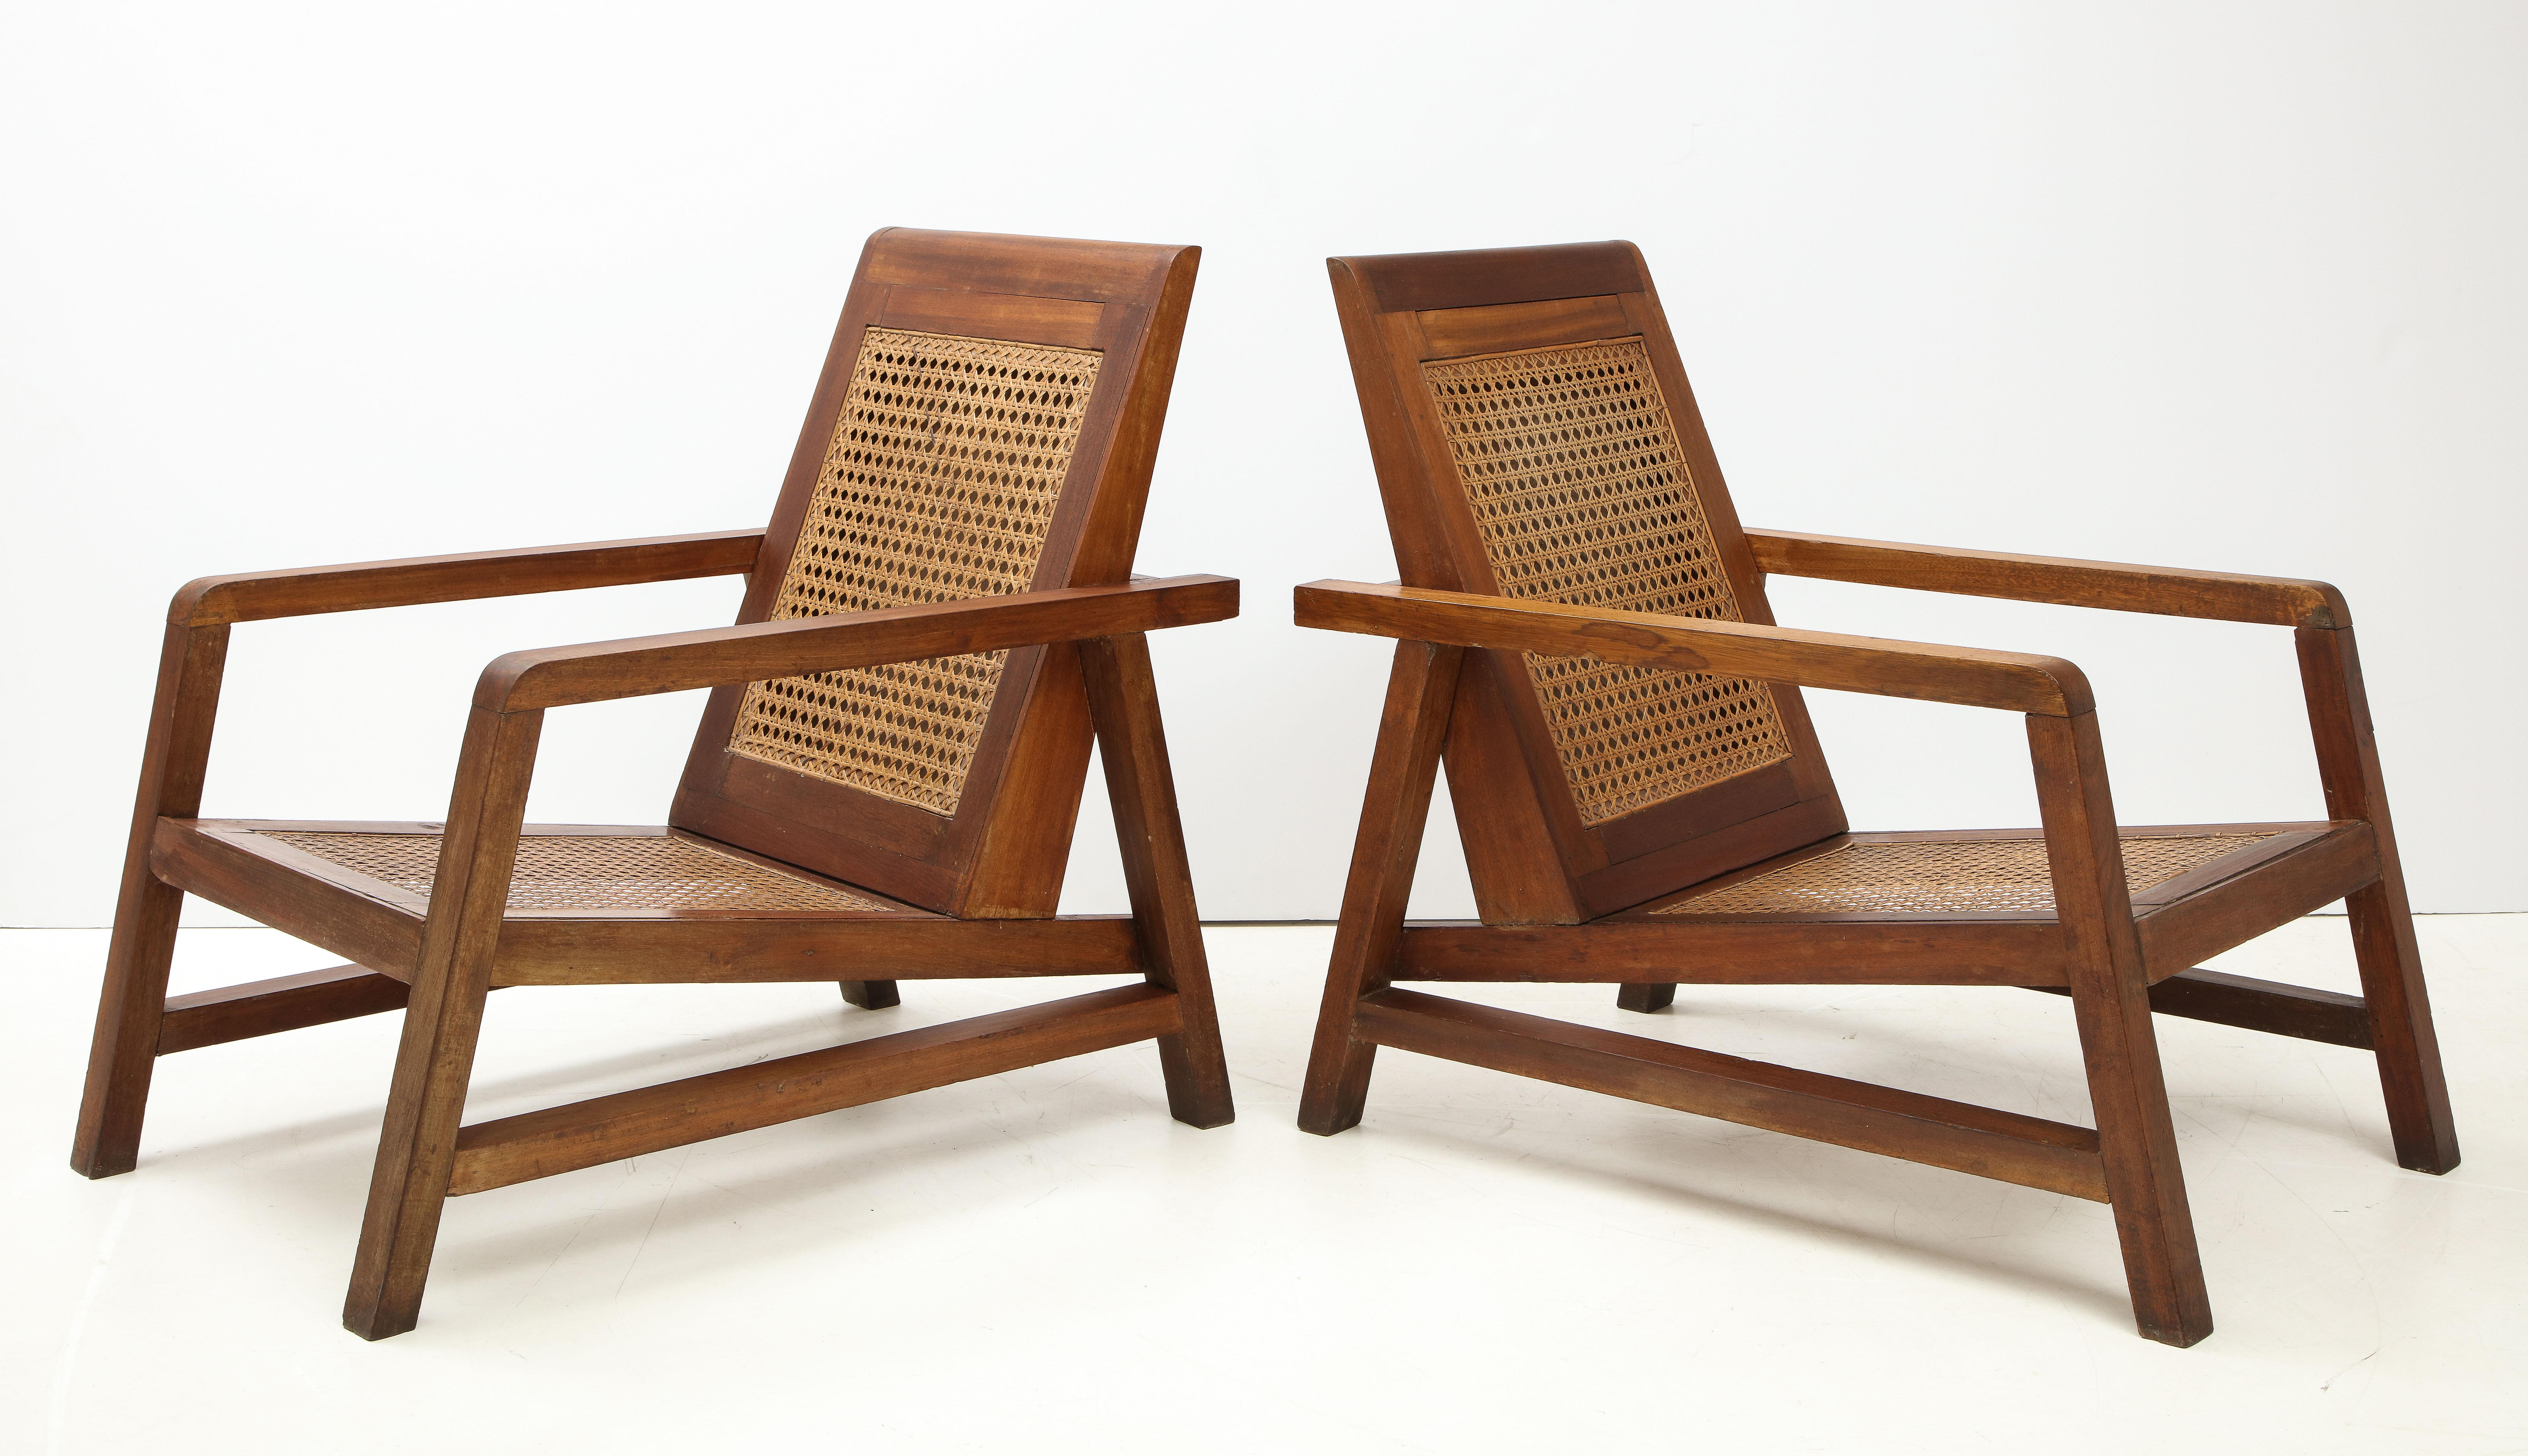 Mid-Century Modern Pair of Modernist Period Pierre Jeanneret Style Chairs, France, c. 1950